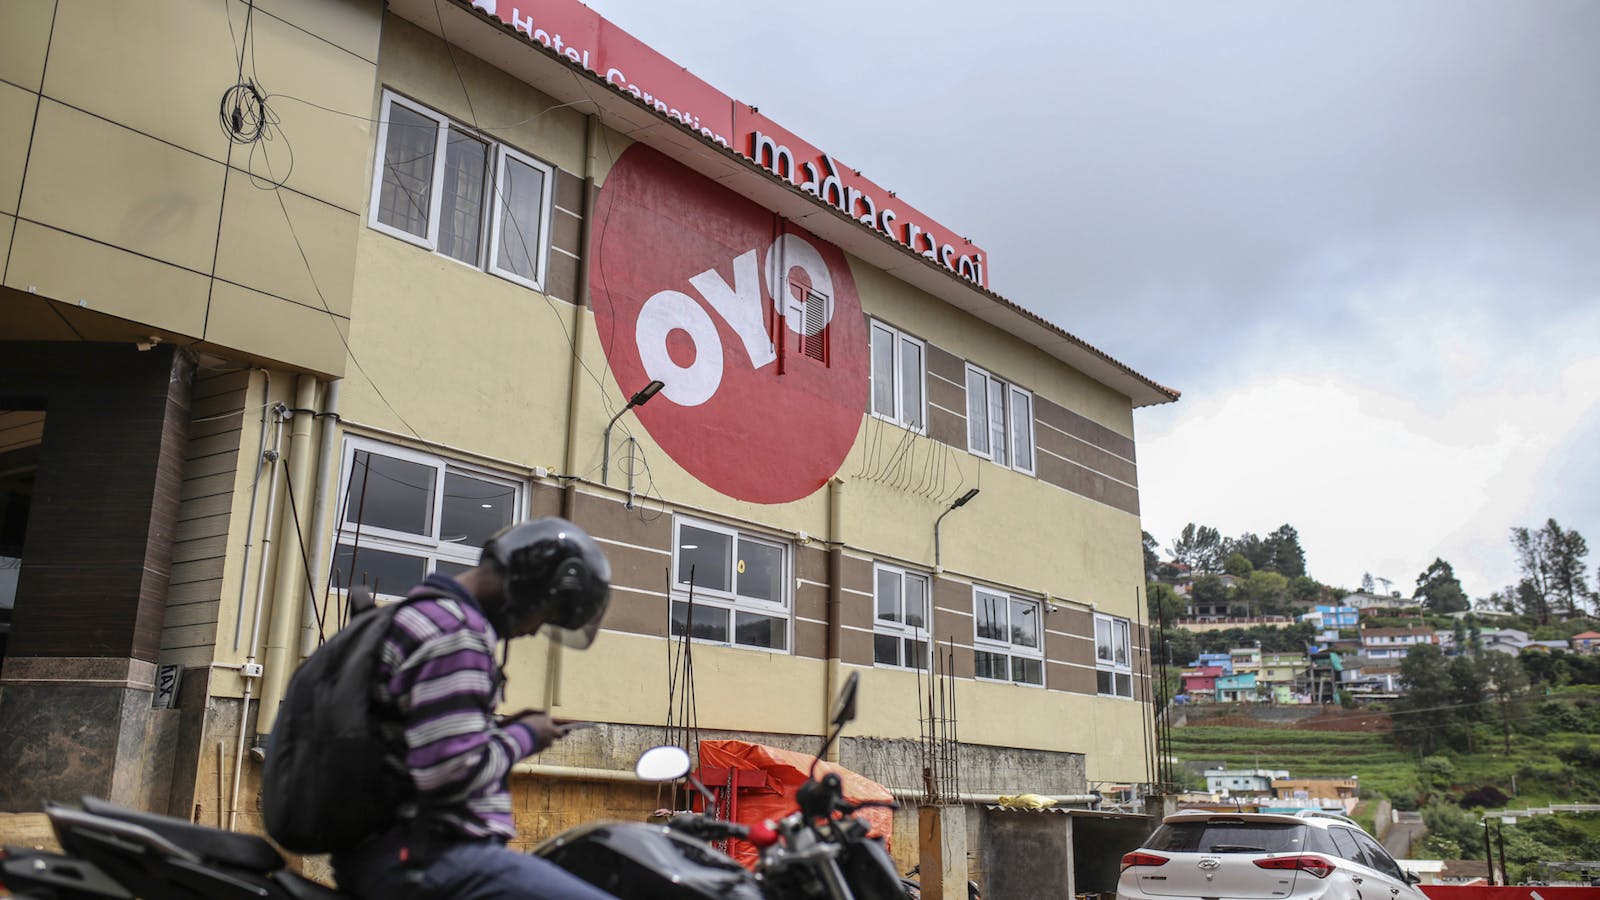 The logo of OYO Rooms is displayed on a hotel in Tamil Nadu, India. Photo by Bloomberg.